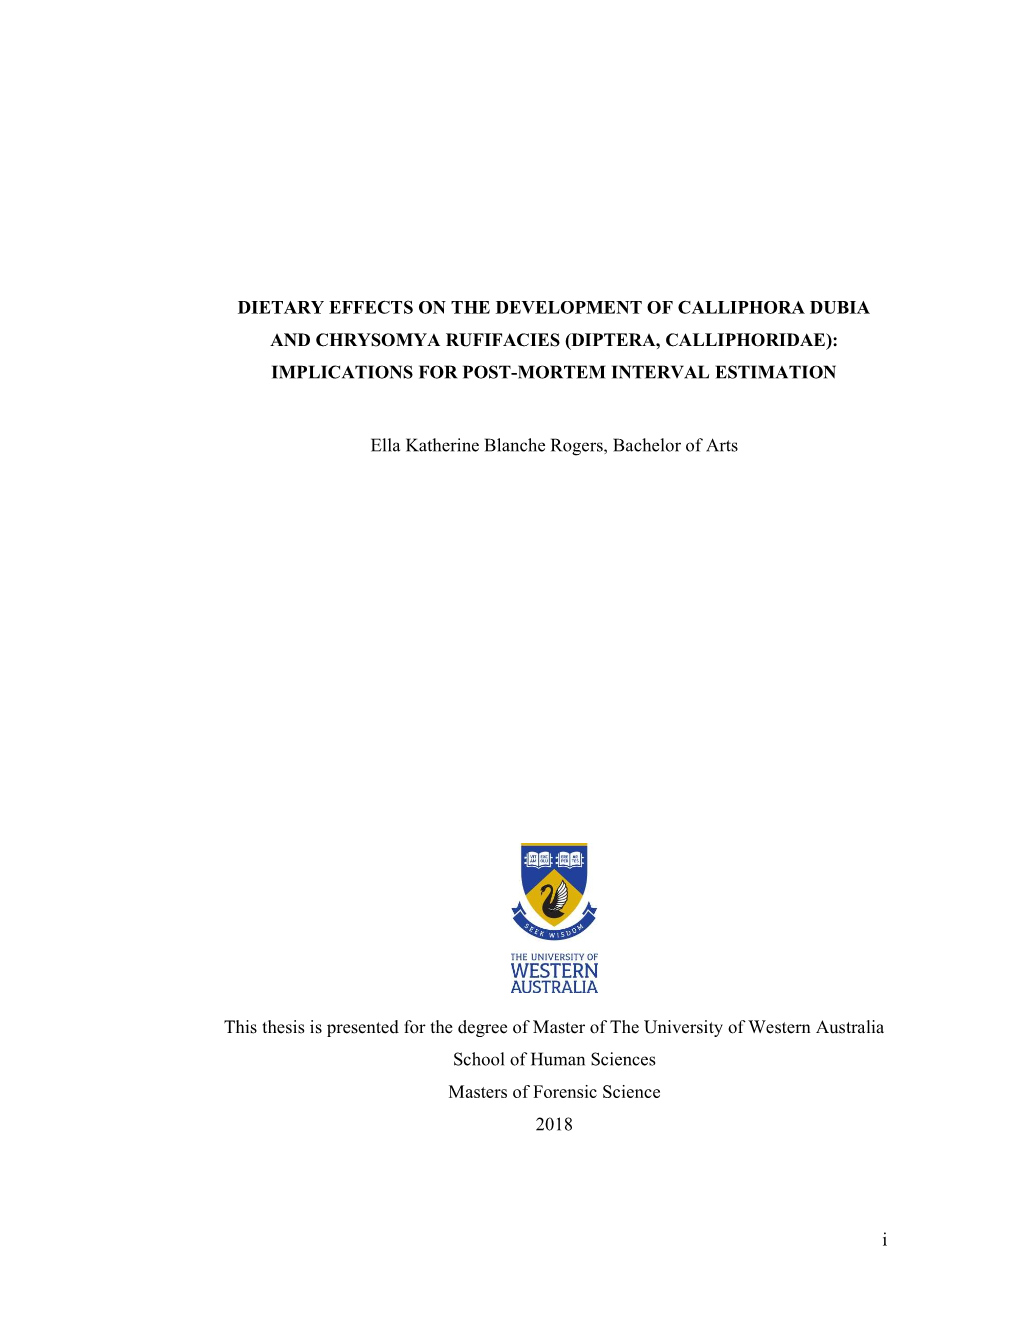 Thesis Is Presented for the Degree of Master of the University of Western Australia School of Human Sciences Masters of Forensic Science 2018